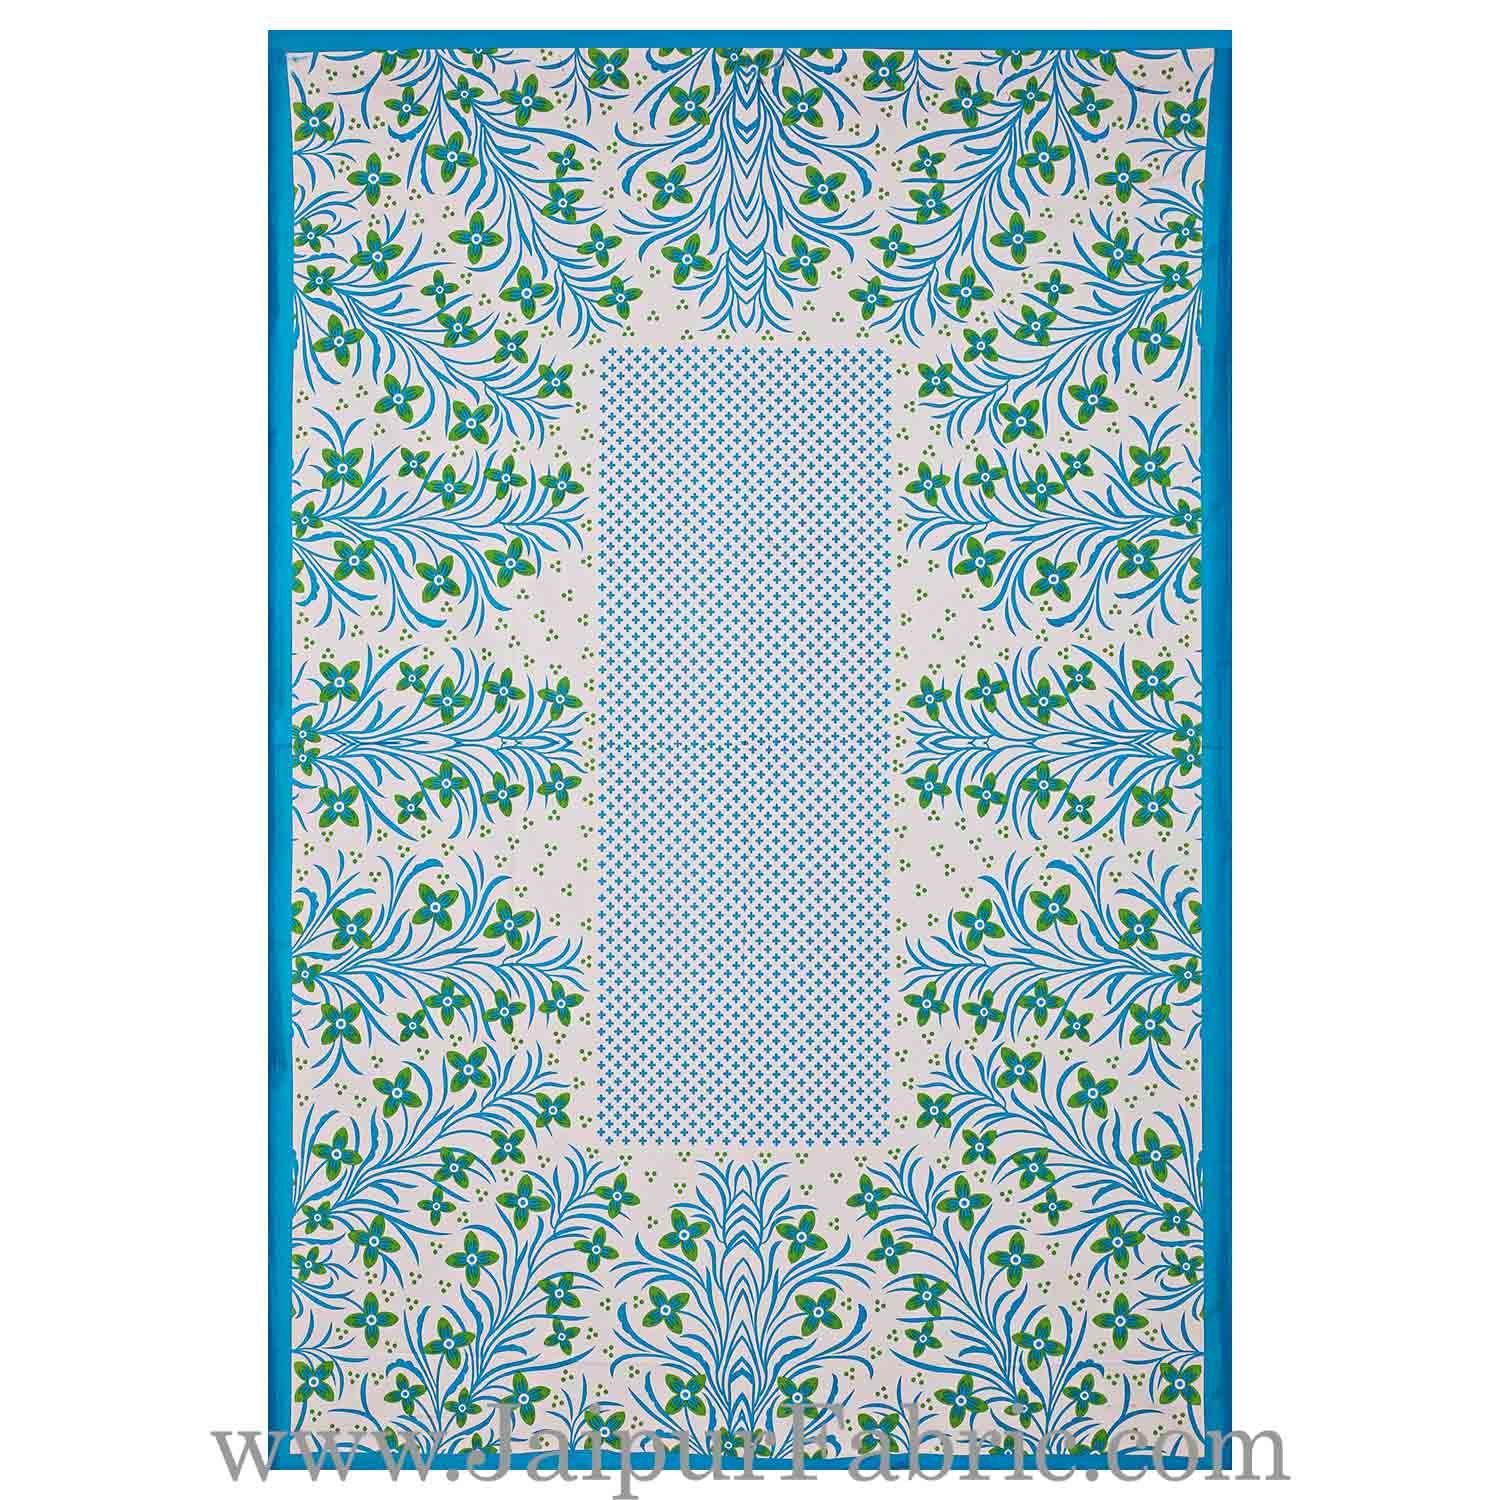 Single Bedsheet Pure Cotton firozi Border with Flower and Leaf Pattern